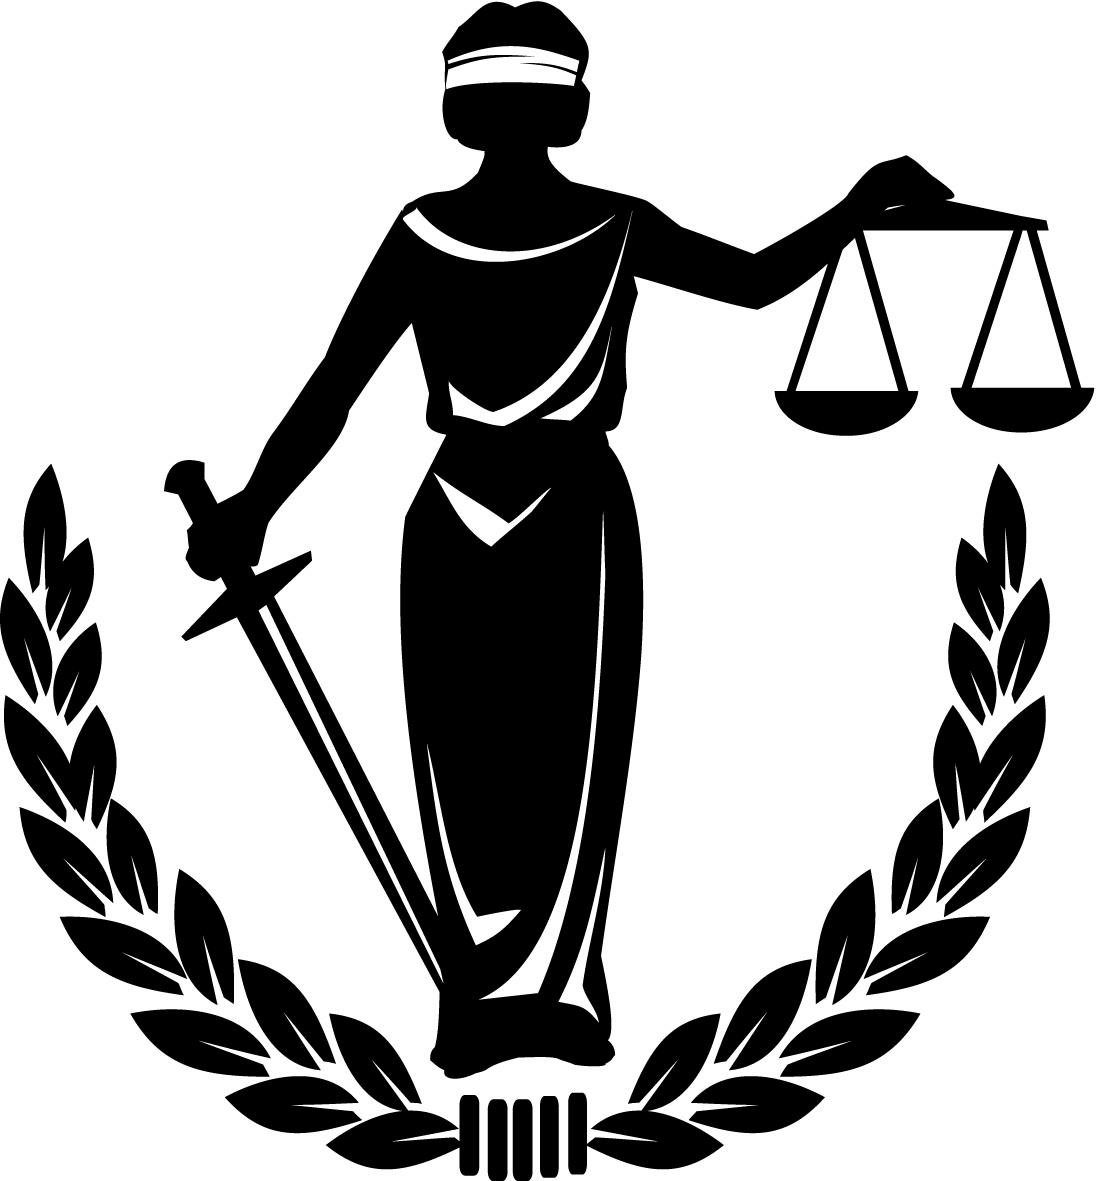 Scale clipart fair trial. Justice google search blonde